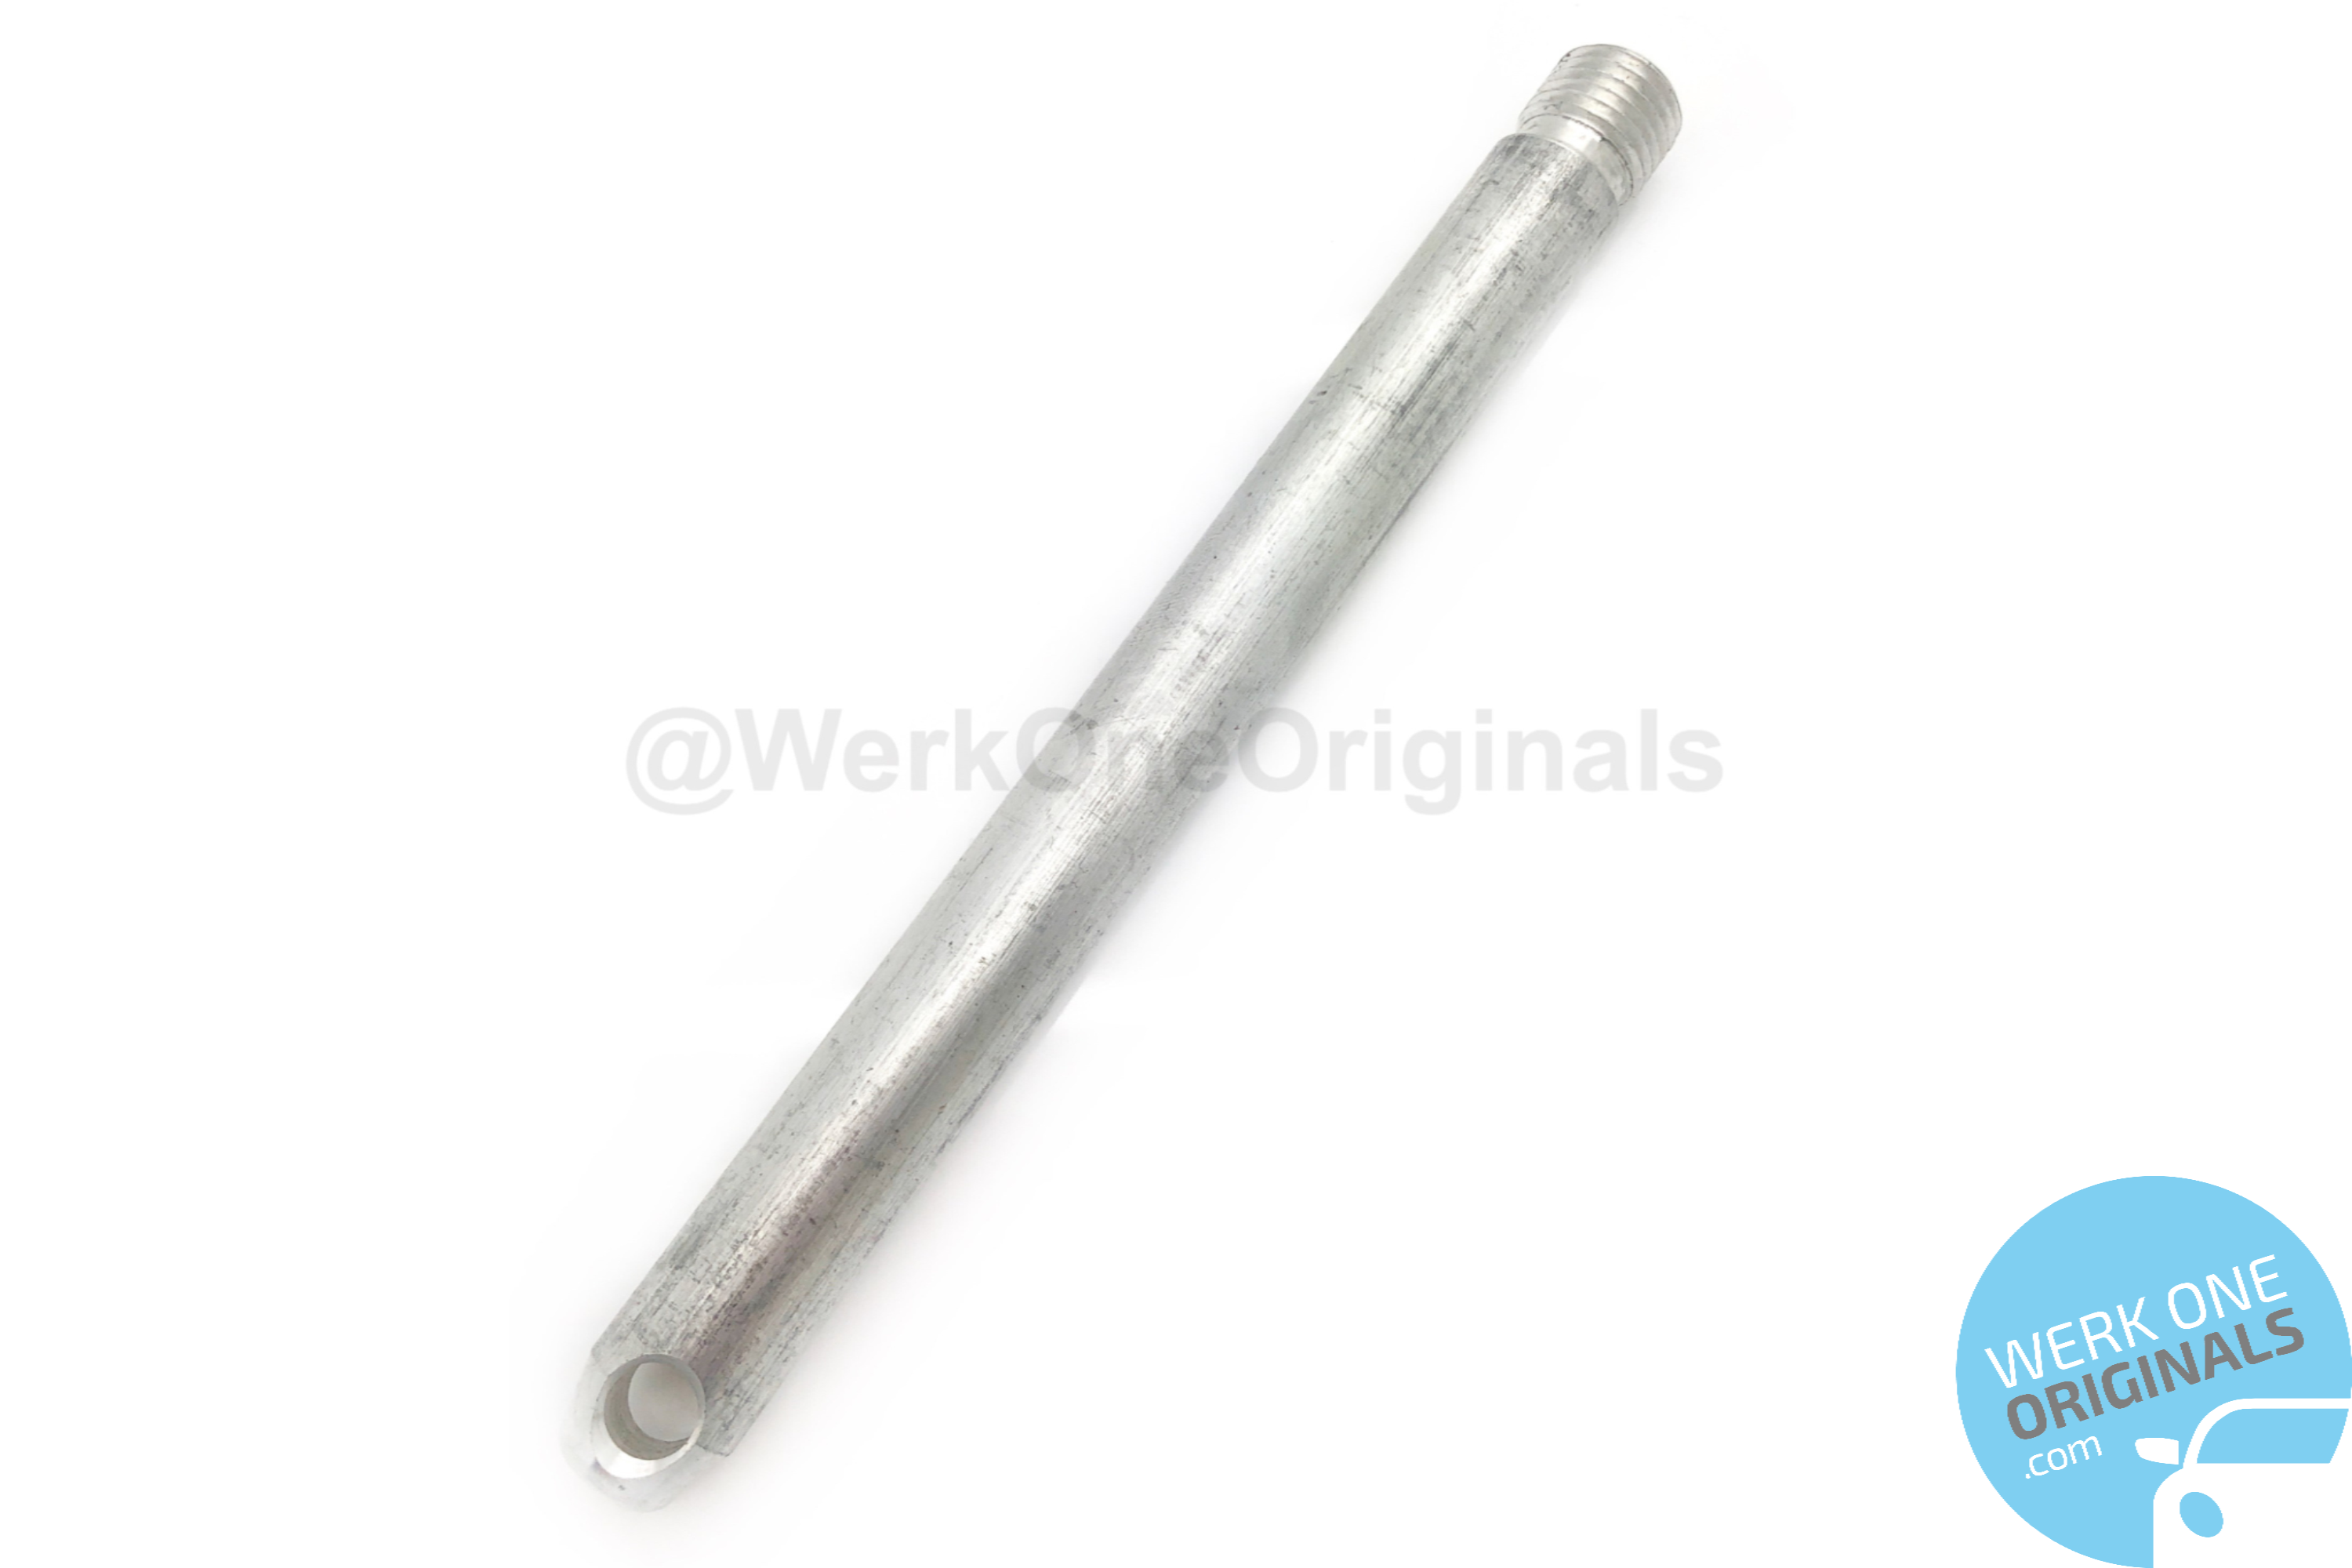 Porsche Official Wheel Removal Tool for 911 Type 997 Models